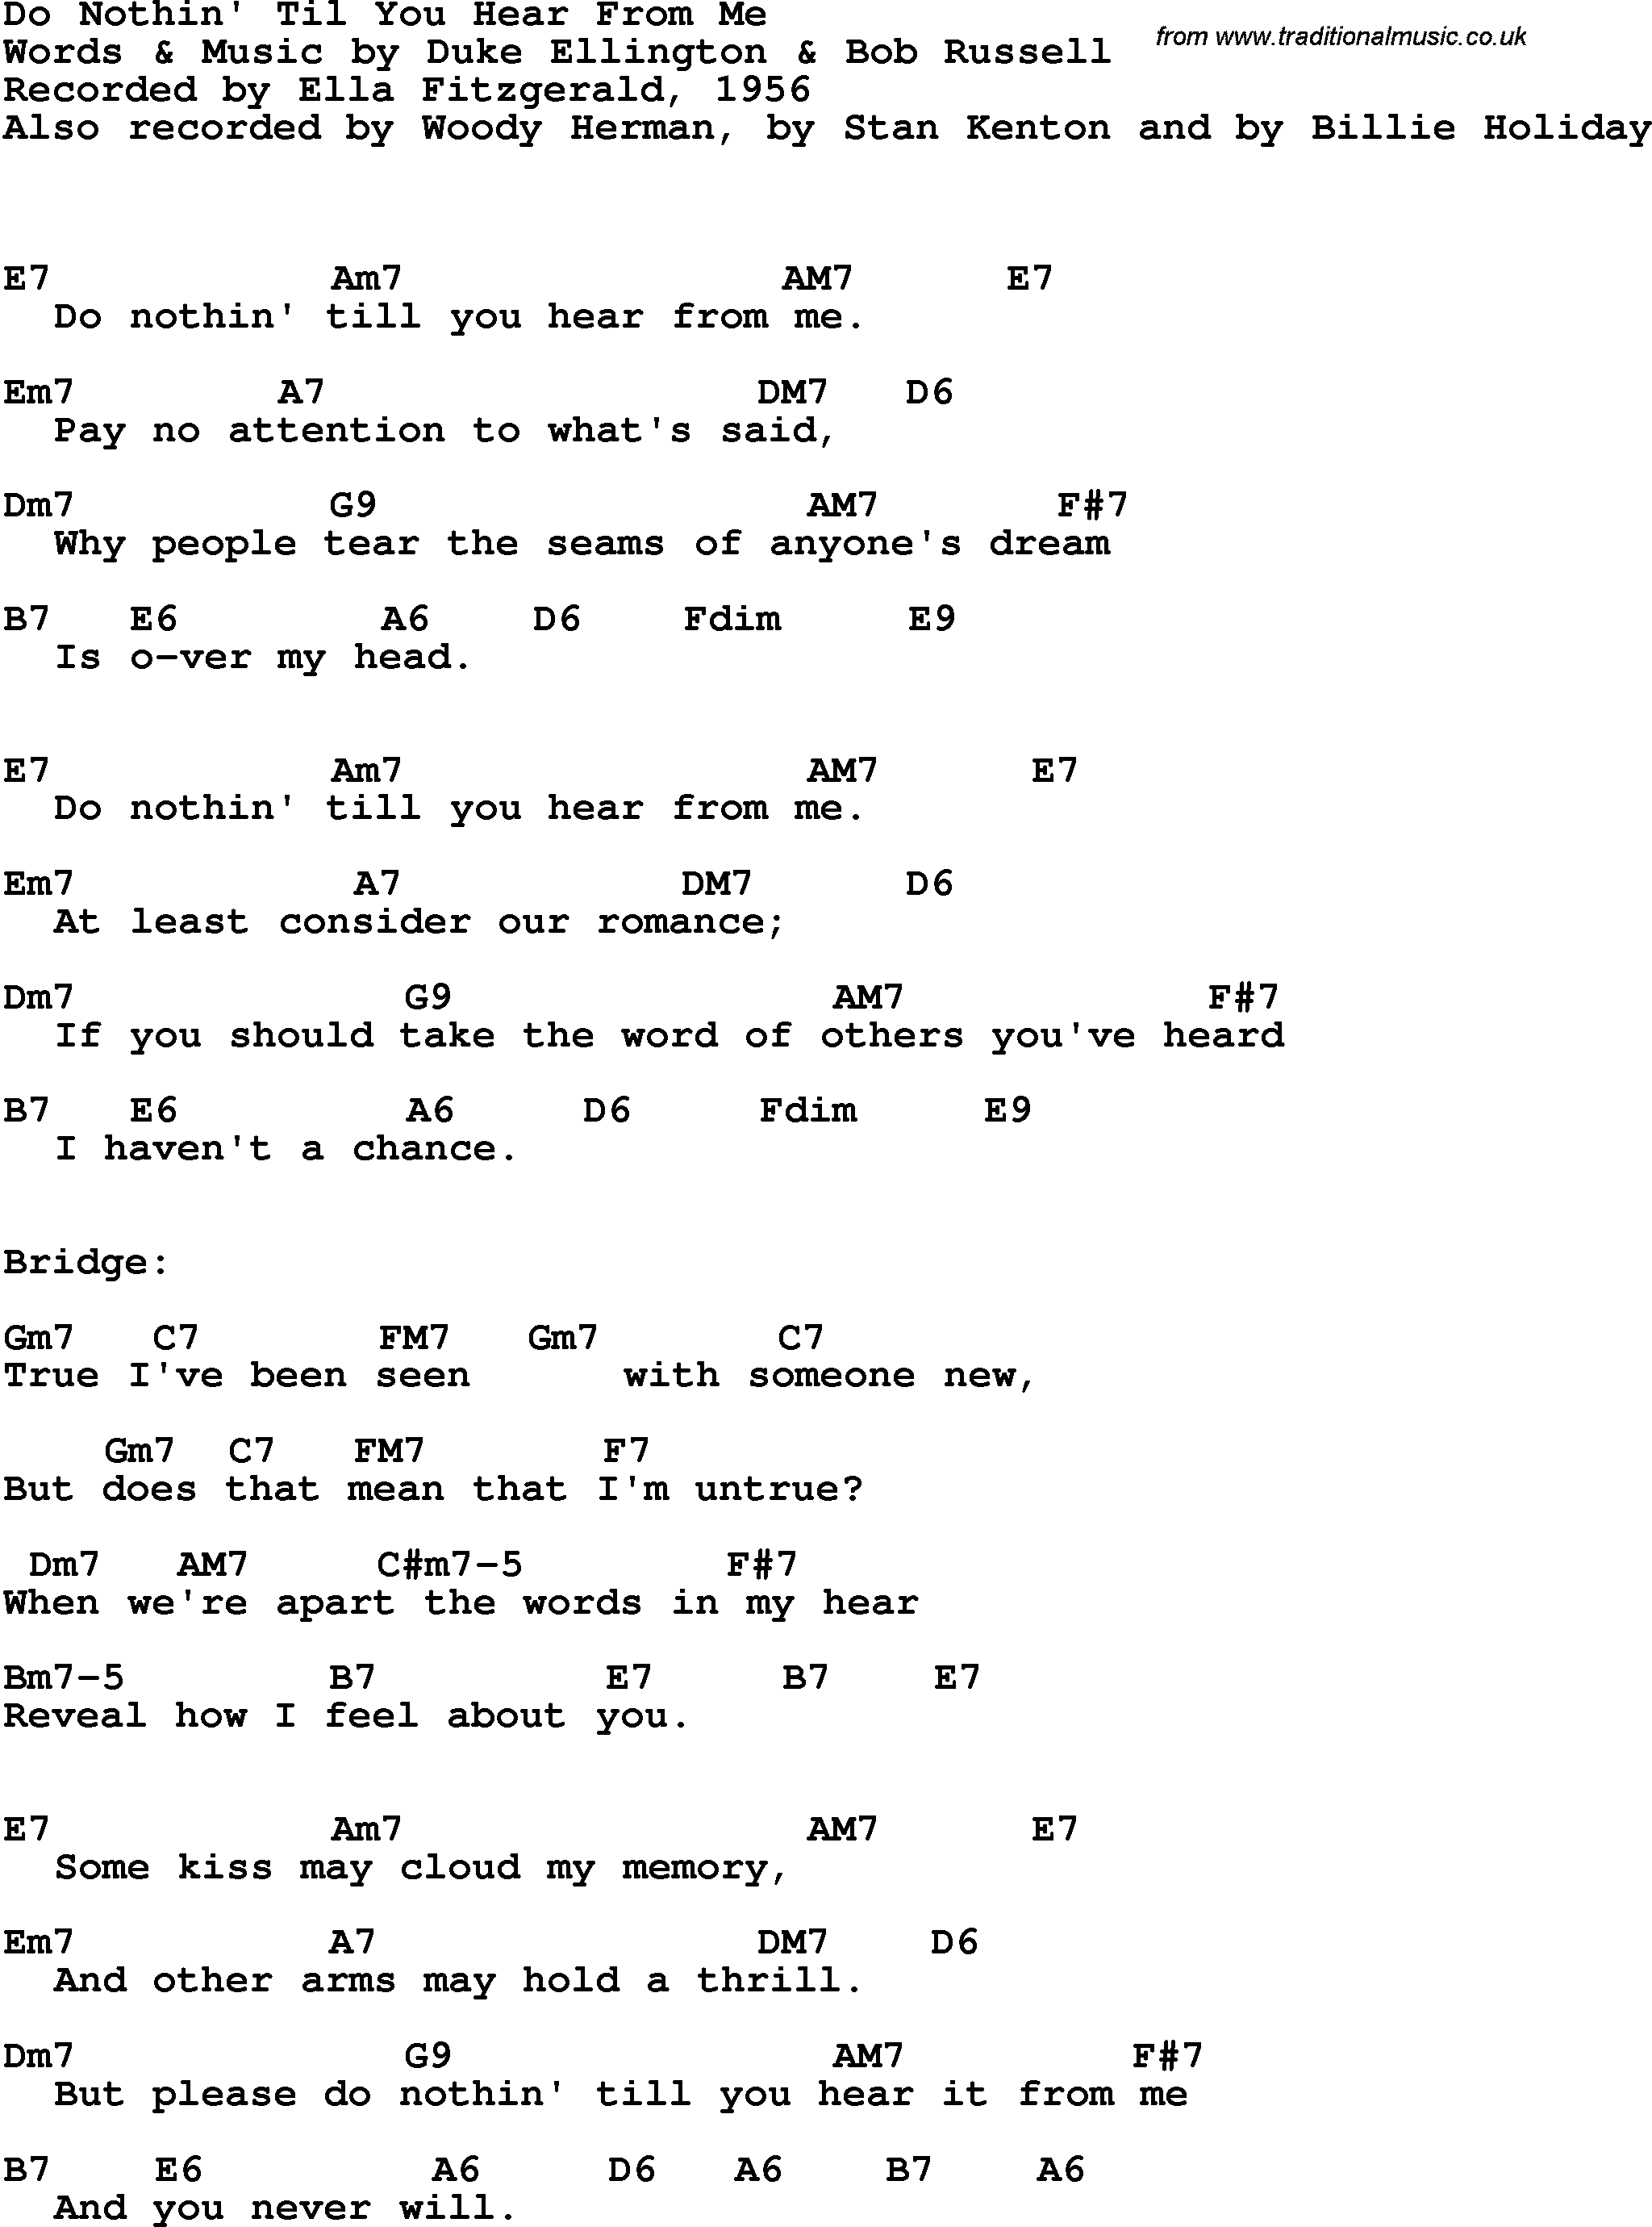 Song Lyrics with guitar chords for Do Nothin' Til You Hear From Me - Ella Fitzgerald, 1956